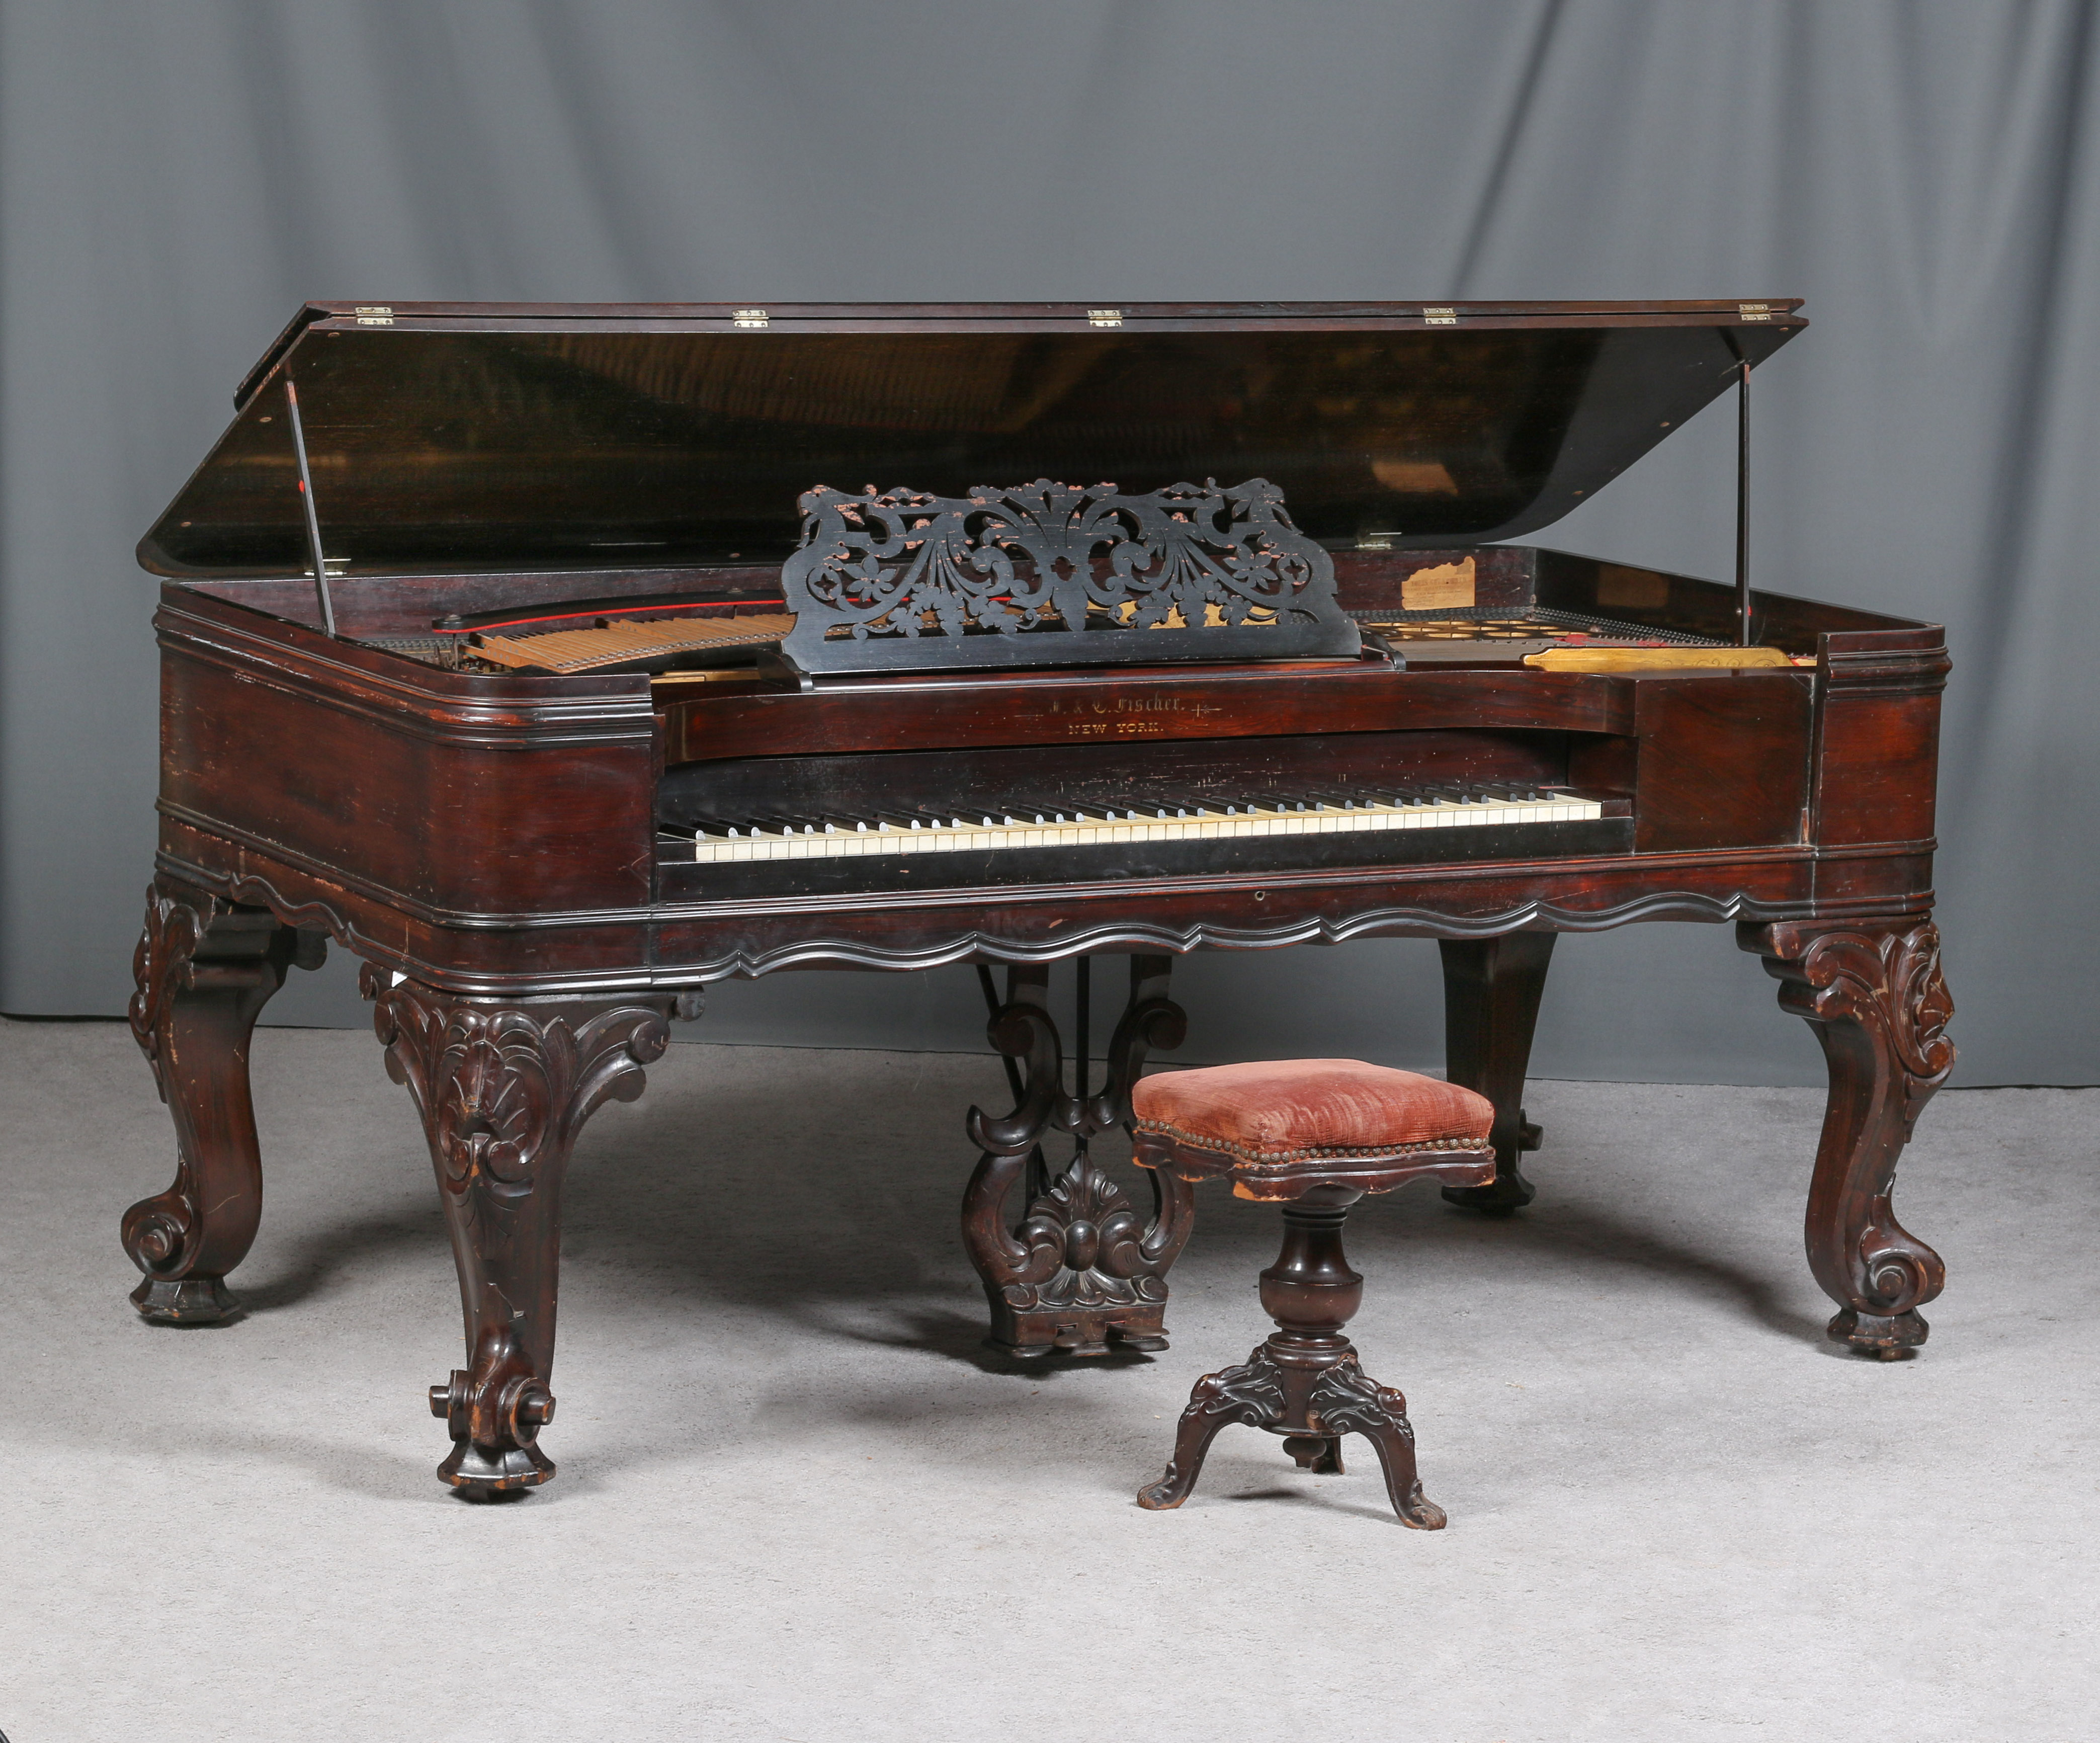 This beautiful antique Square Grand Piano is waiting to be fully restored and purchased to go to a wonderful home.